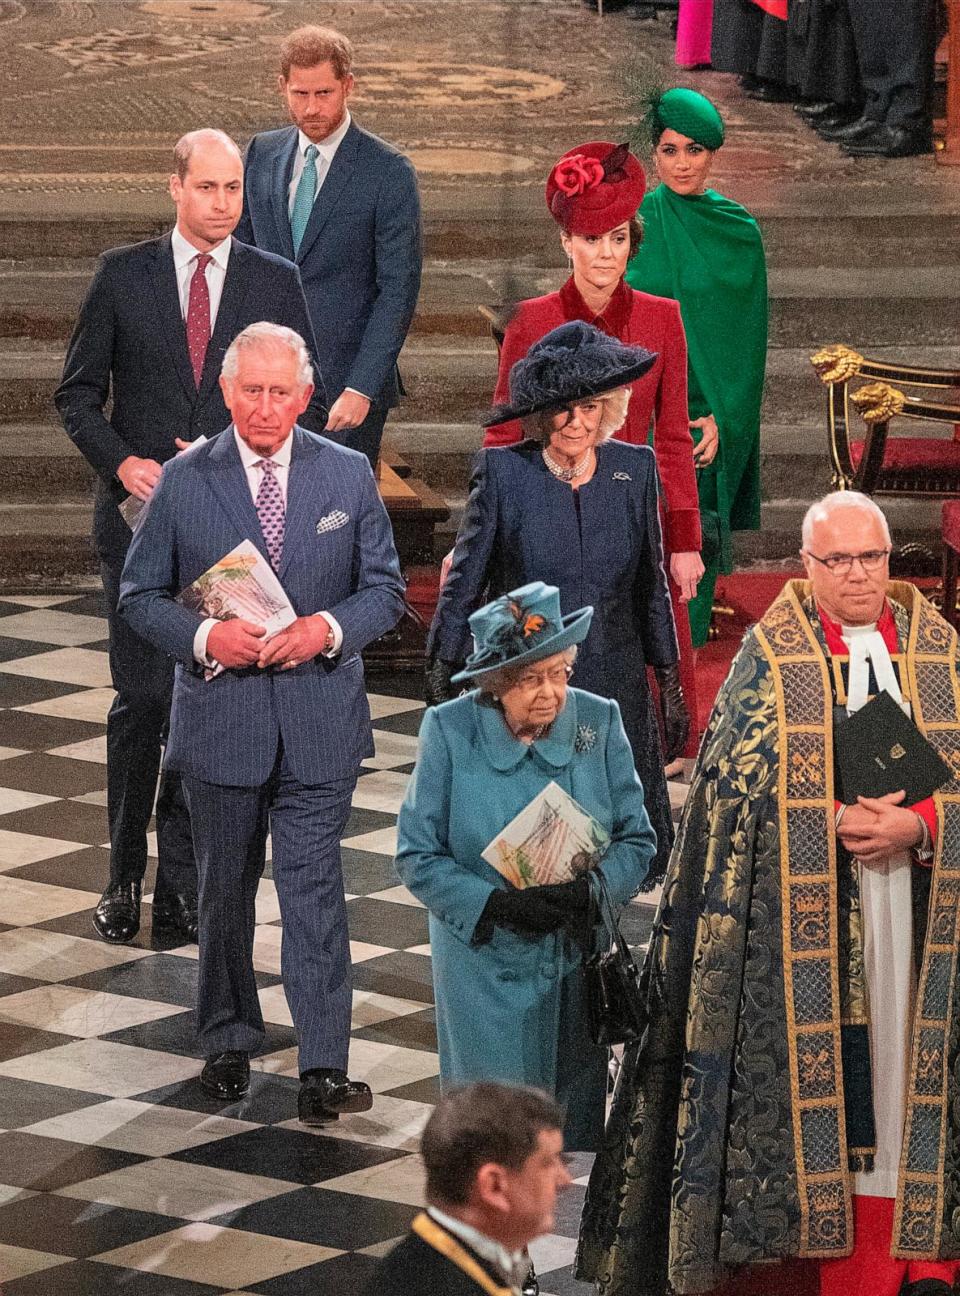 PHOTO: Queen Elizabeth, Prince Charles, Prince of Wales and Camilla, Prince William, Catherine, Duchess of Cambridge, Prince Harry, Duke of Sussex and Meghan, Duchess of Sussex attend the Commonwealth Day Service 2020, March 9, 2020, in London. (WPA Pool/Getty Images)